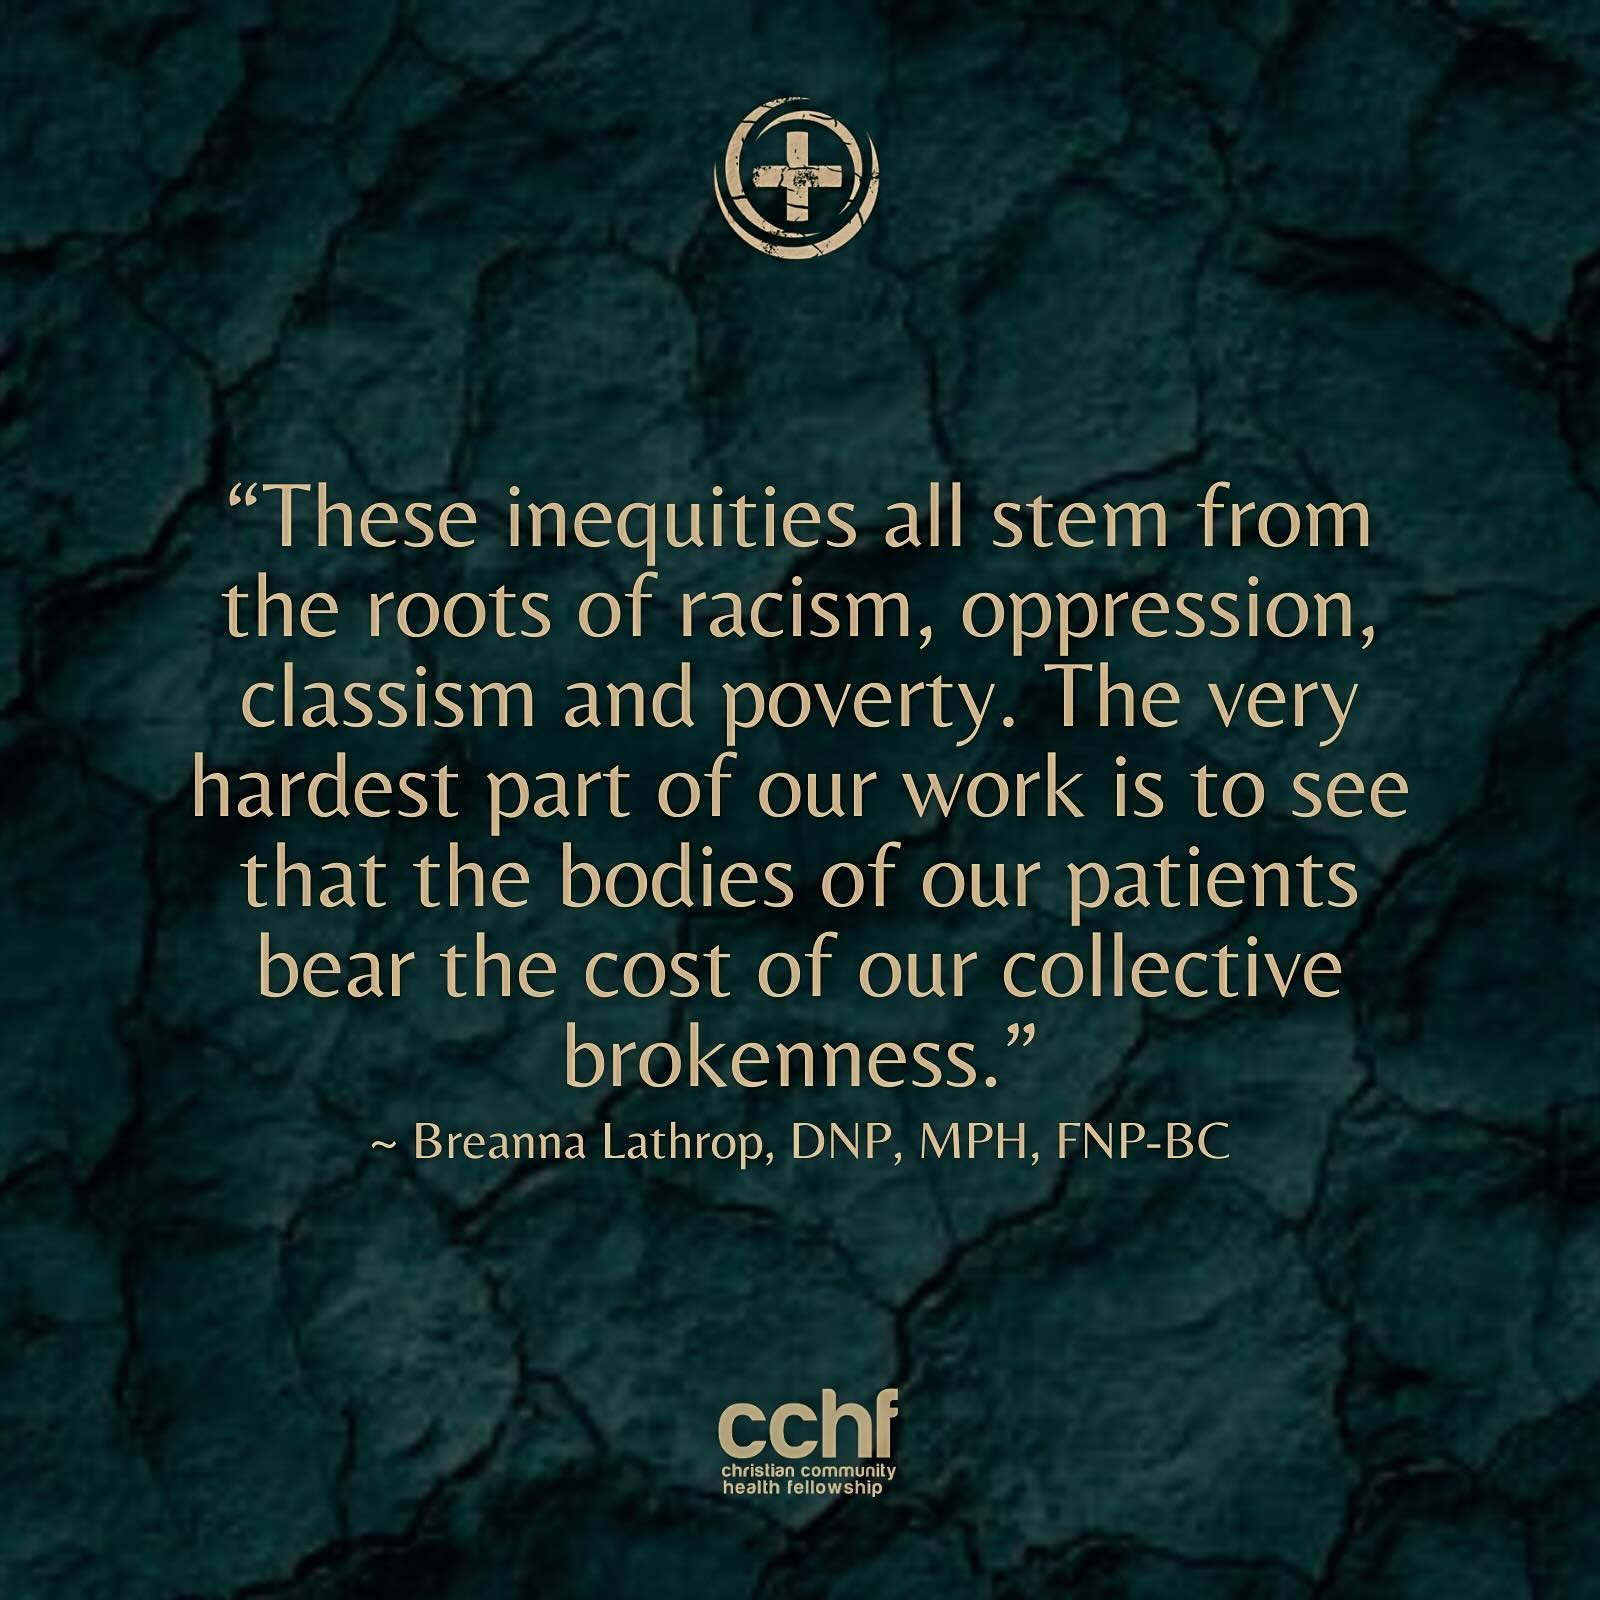 &ldquo;These inequities all stem from the roots of racism, oppression, classism and poverty.&rdquo; 
~ Breanna Lathrop, DNP, MPH, FNP-BC

#CCHF #ChristianCommunityHealthFellowship #CCHFConference #CCHFConference2024 #Justiceinhealthcare #Healthcarepr